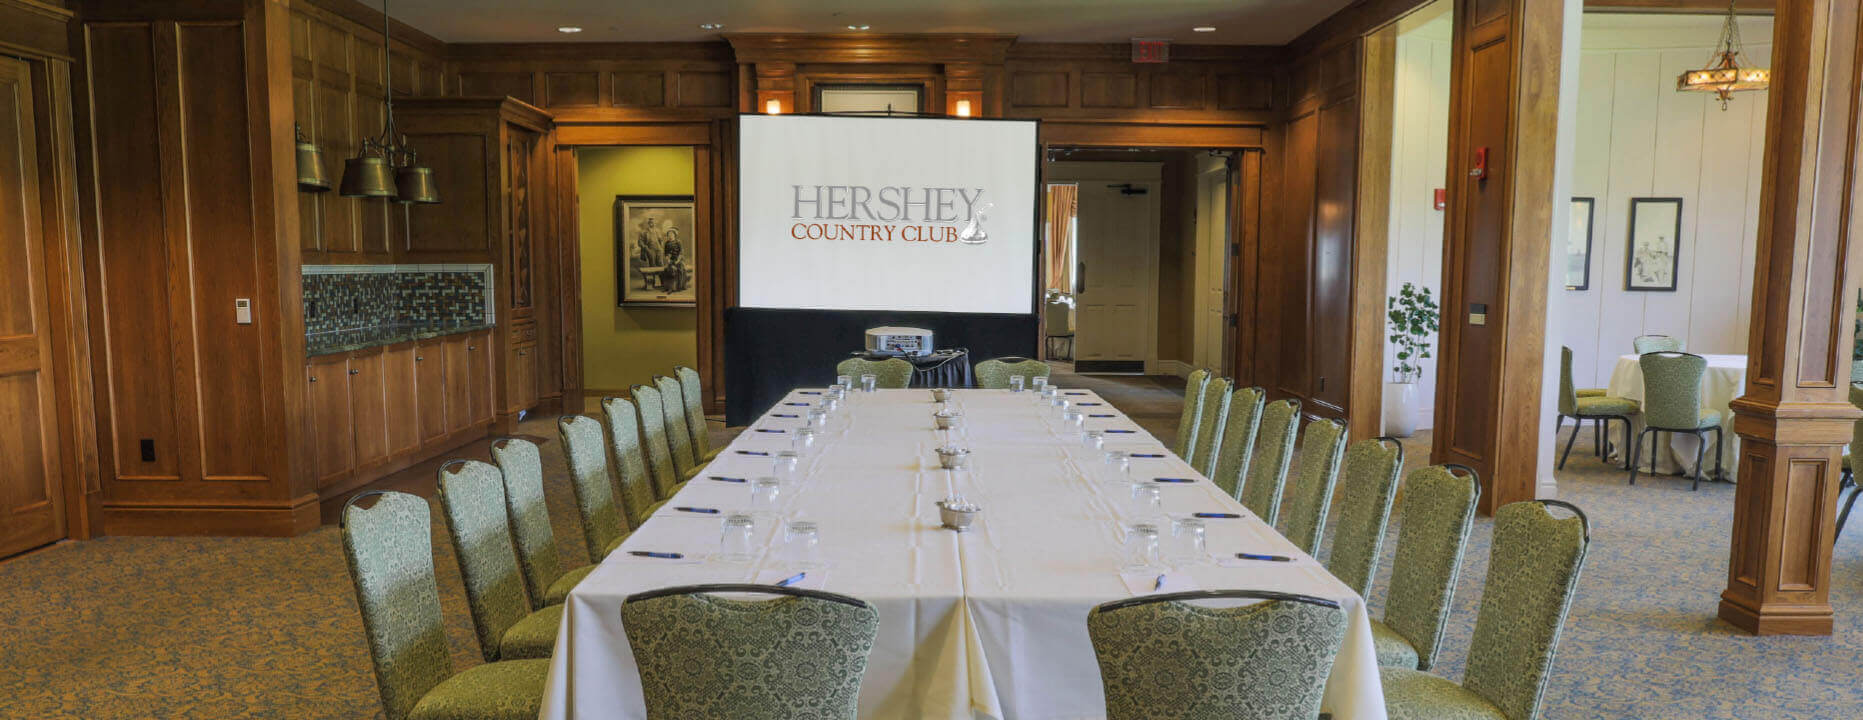 Traditions Room at Hershey Country Club